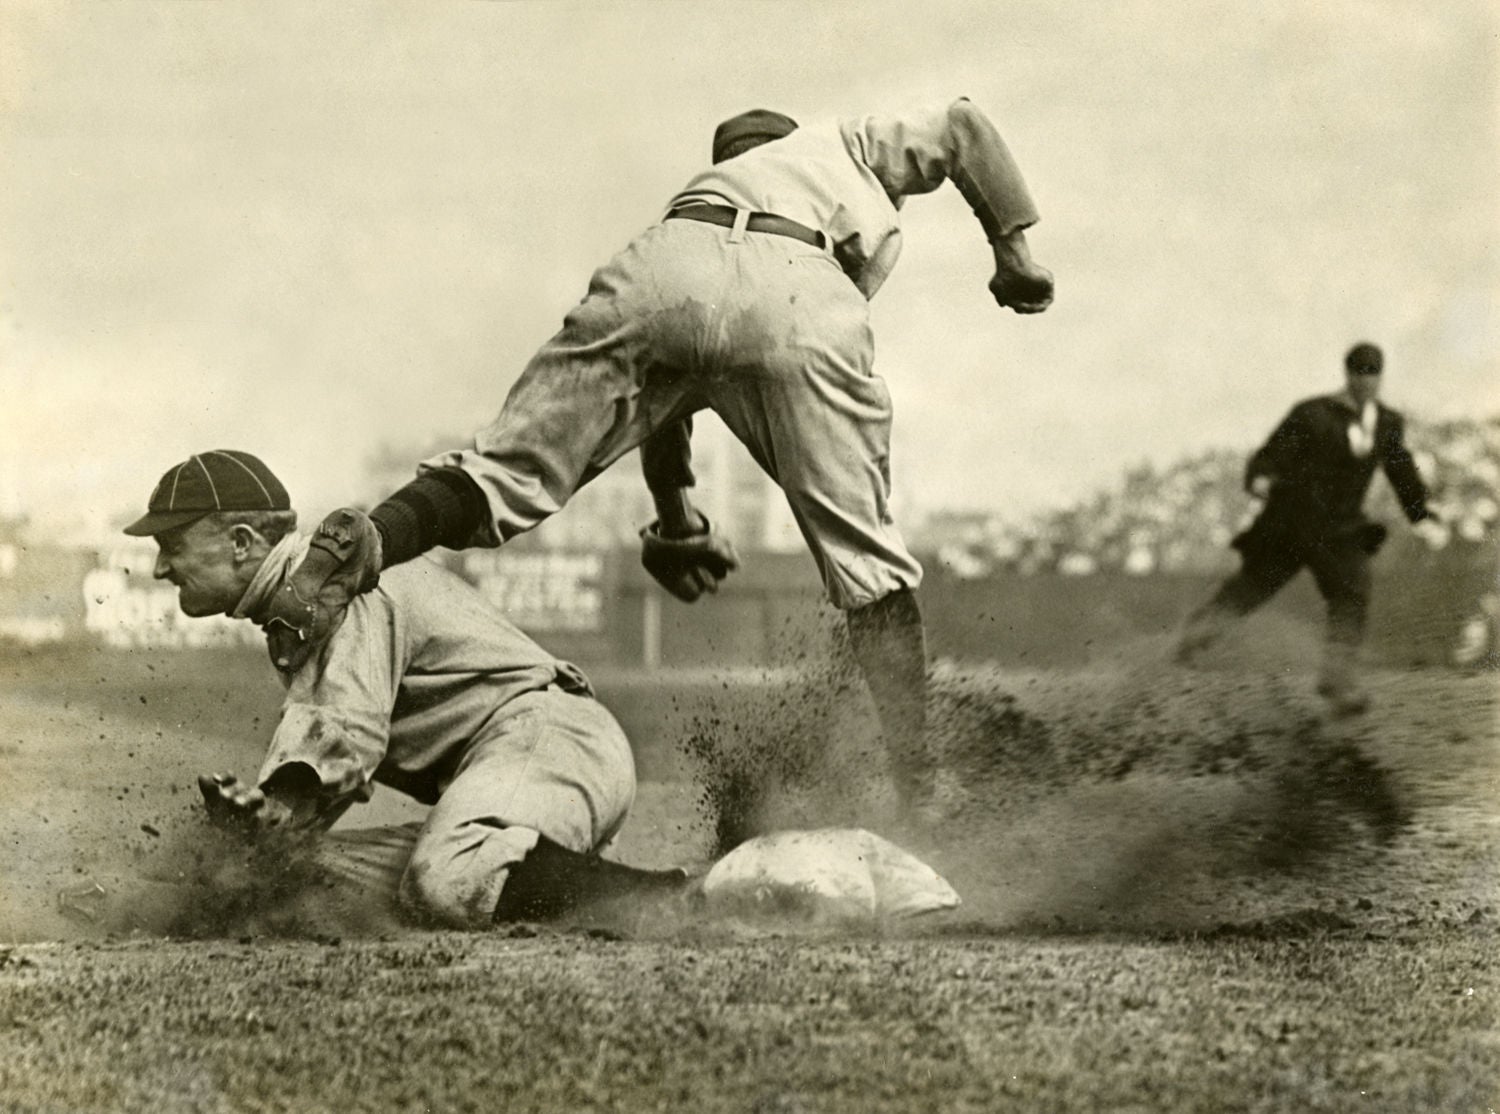 90 years ago, Detroit Tigers legend Ty Cobb challenged myths of